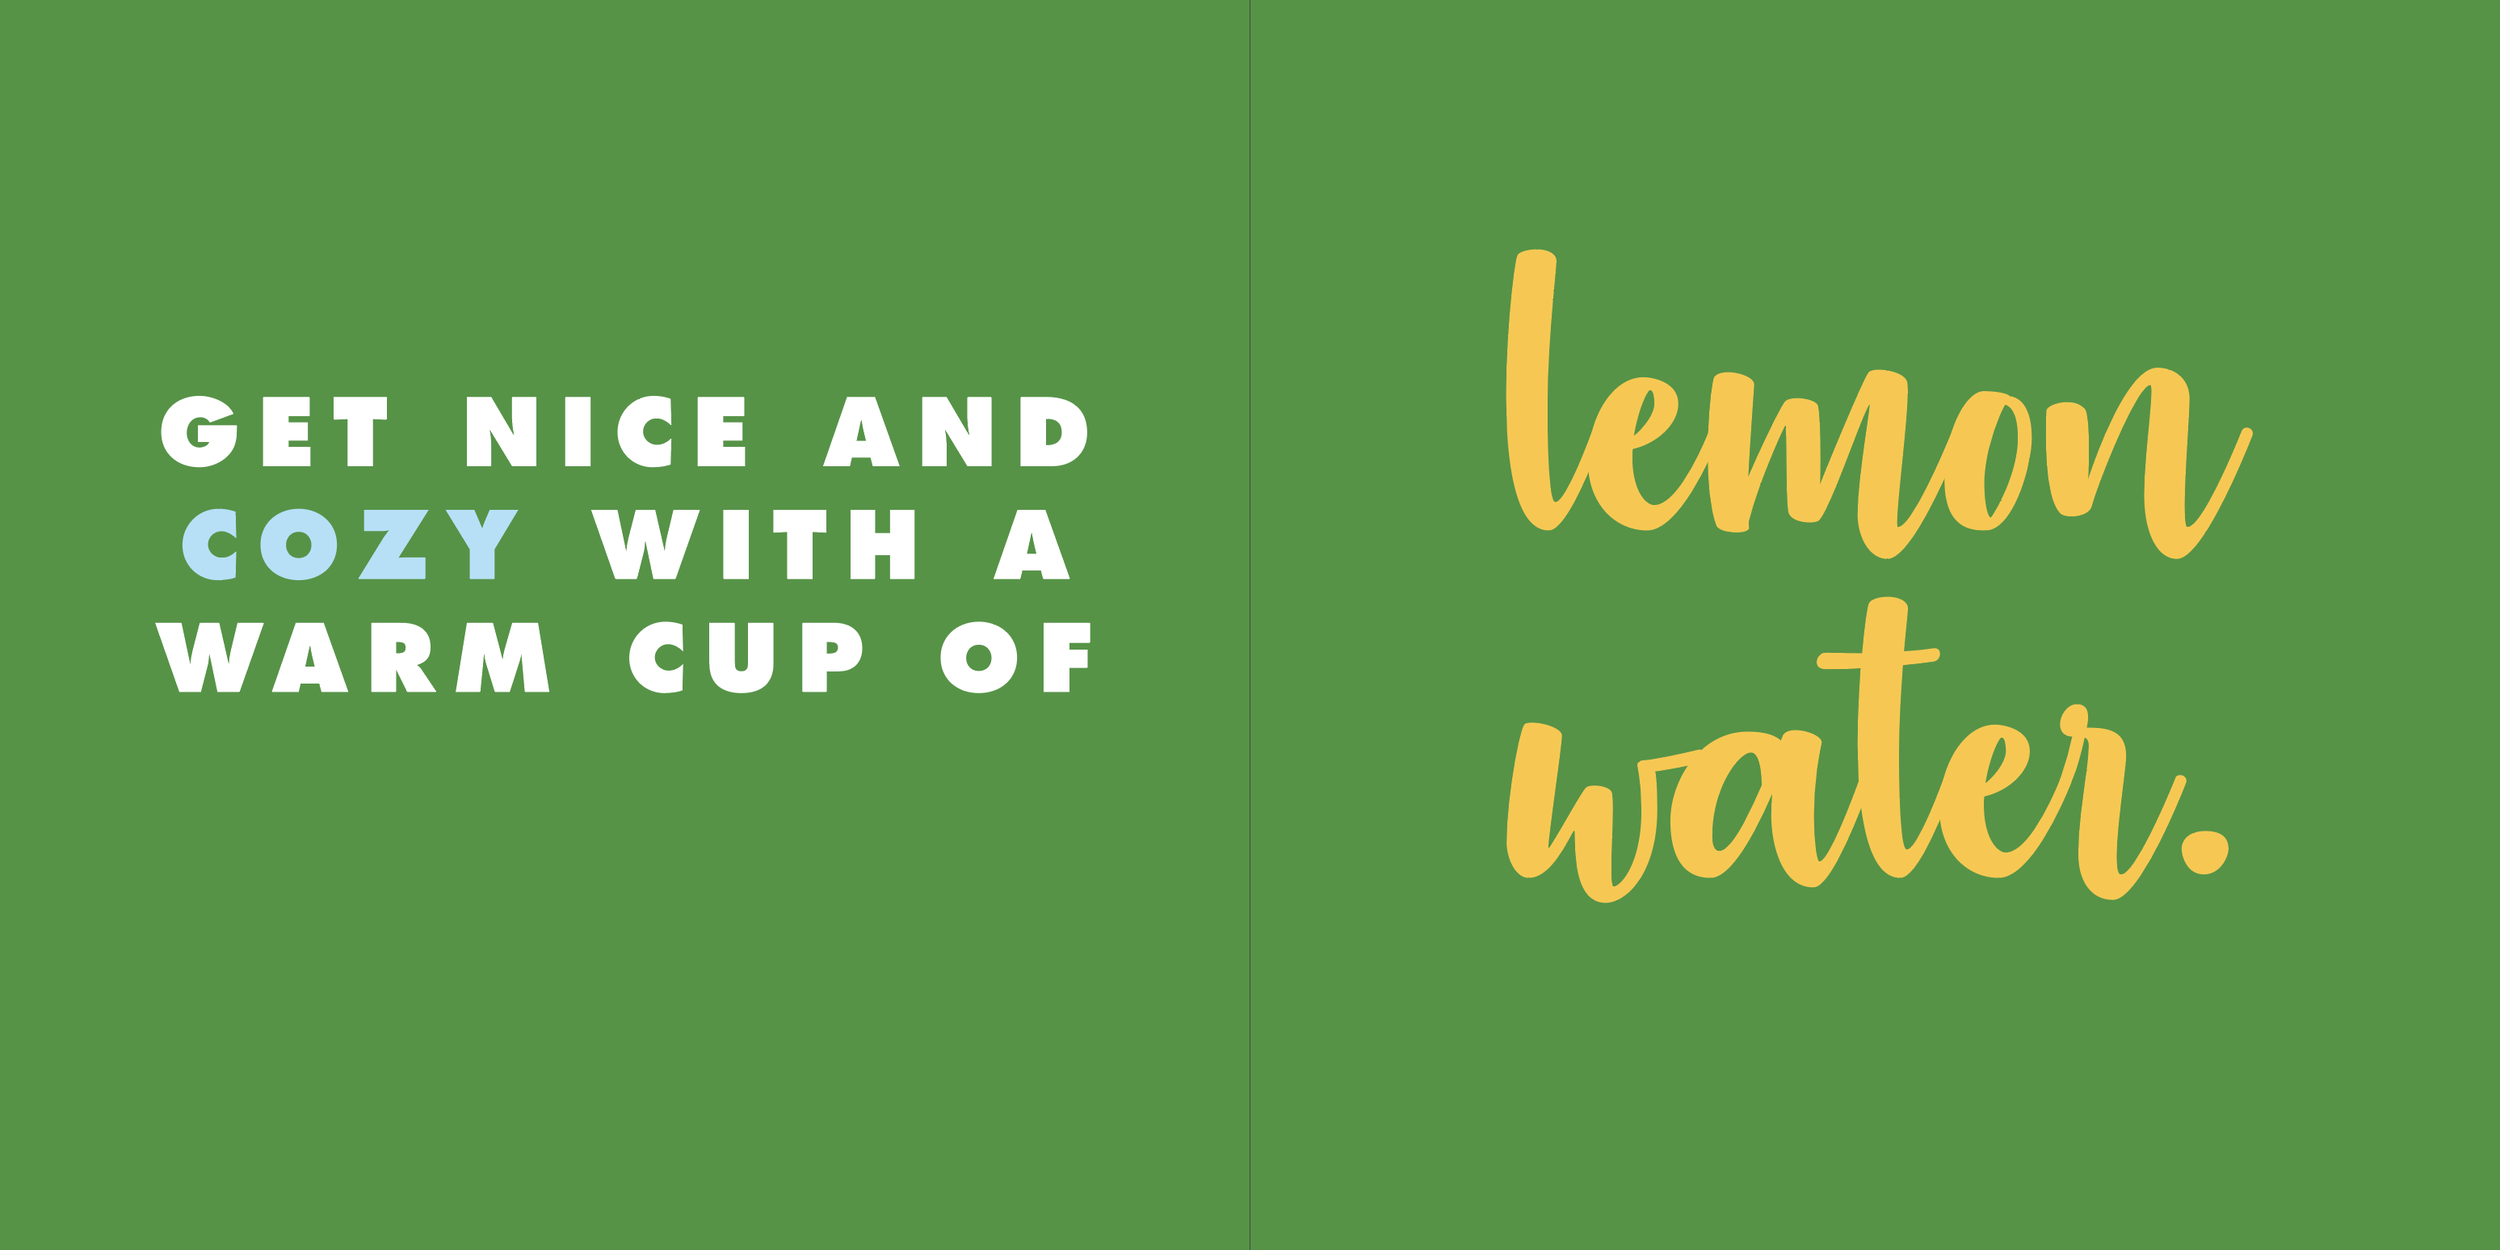 Book quote: Get nice and cozy with a warm cup of lemon water.